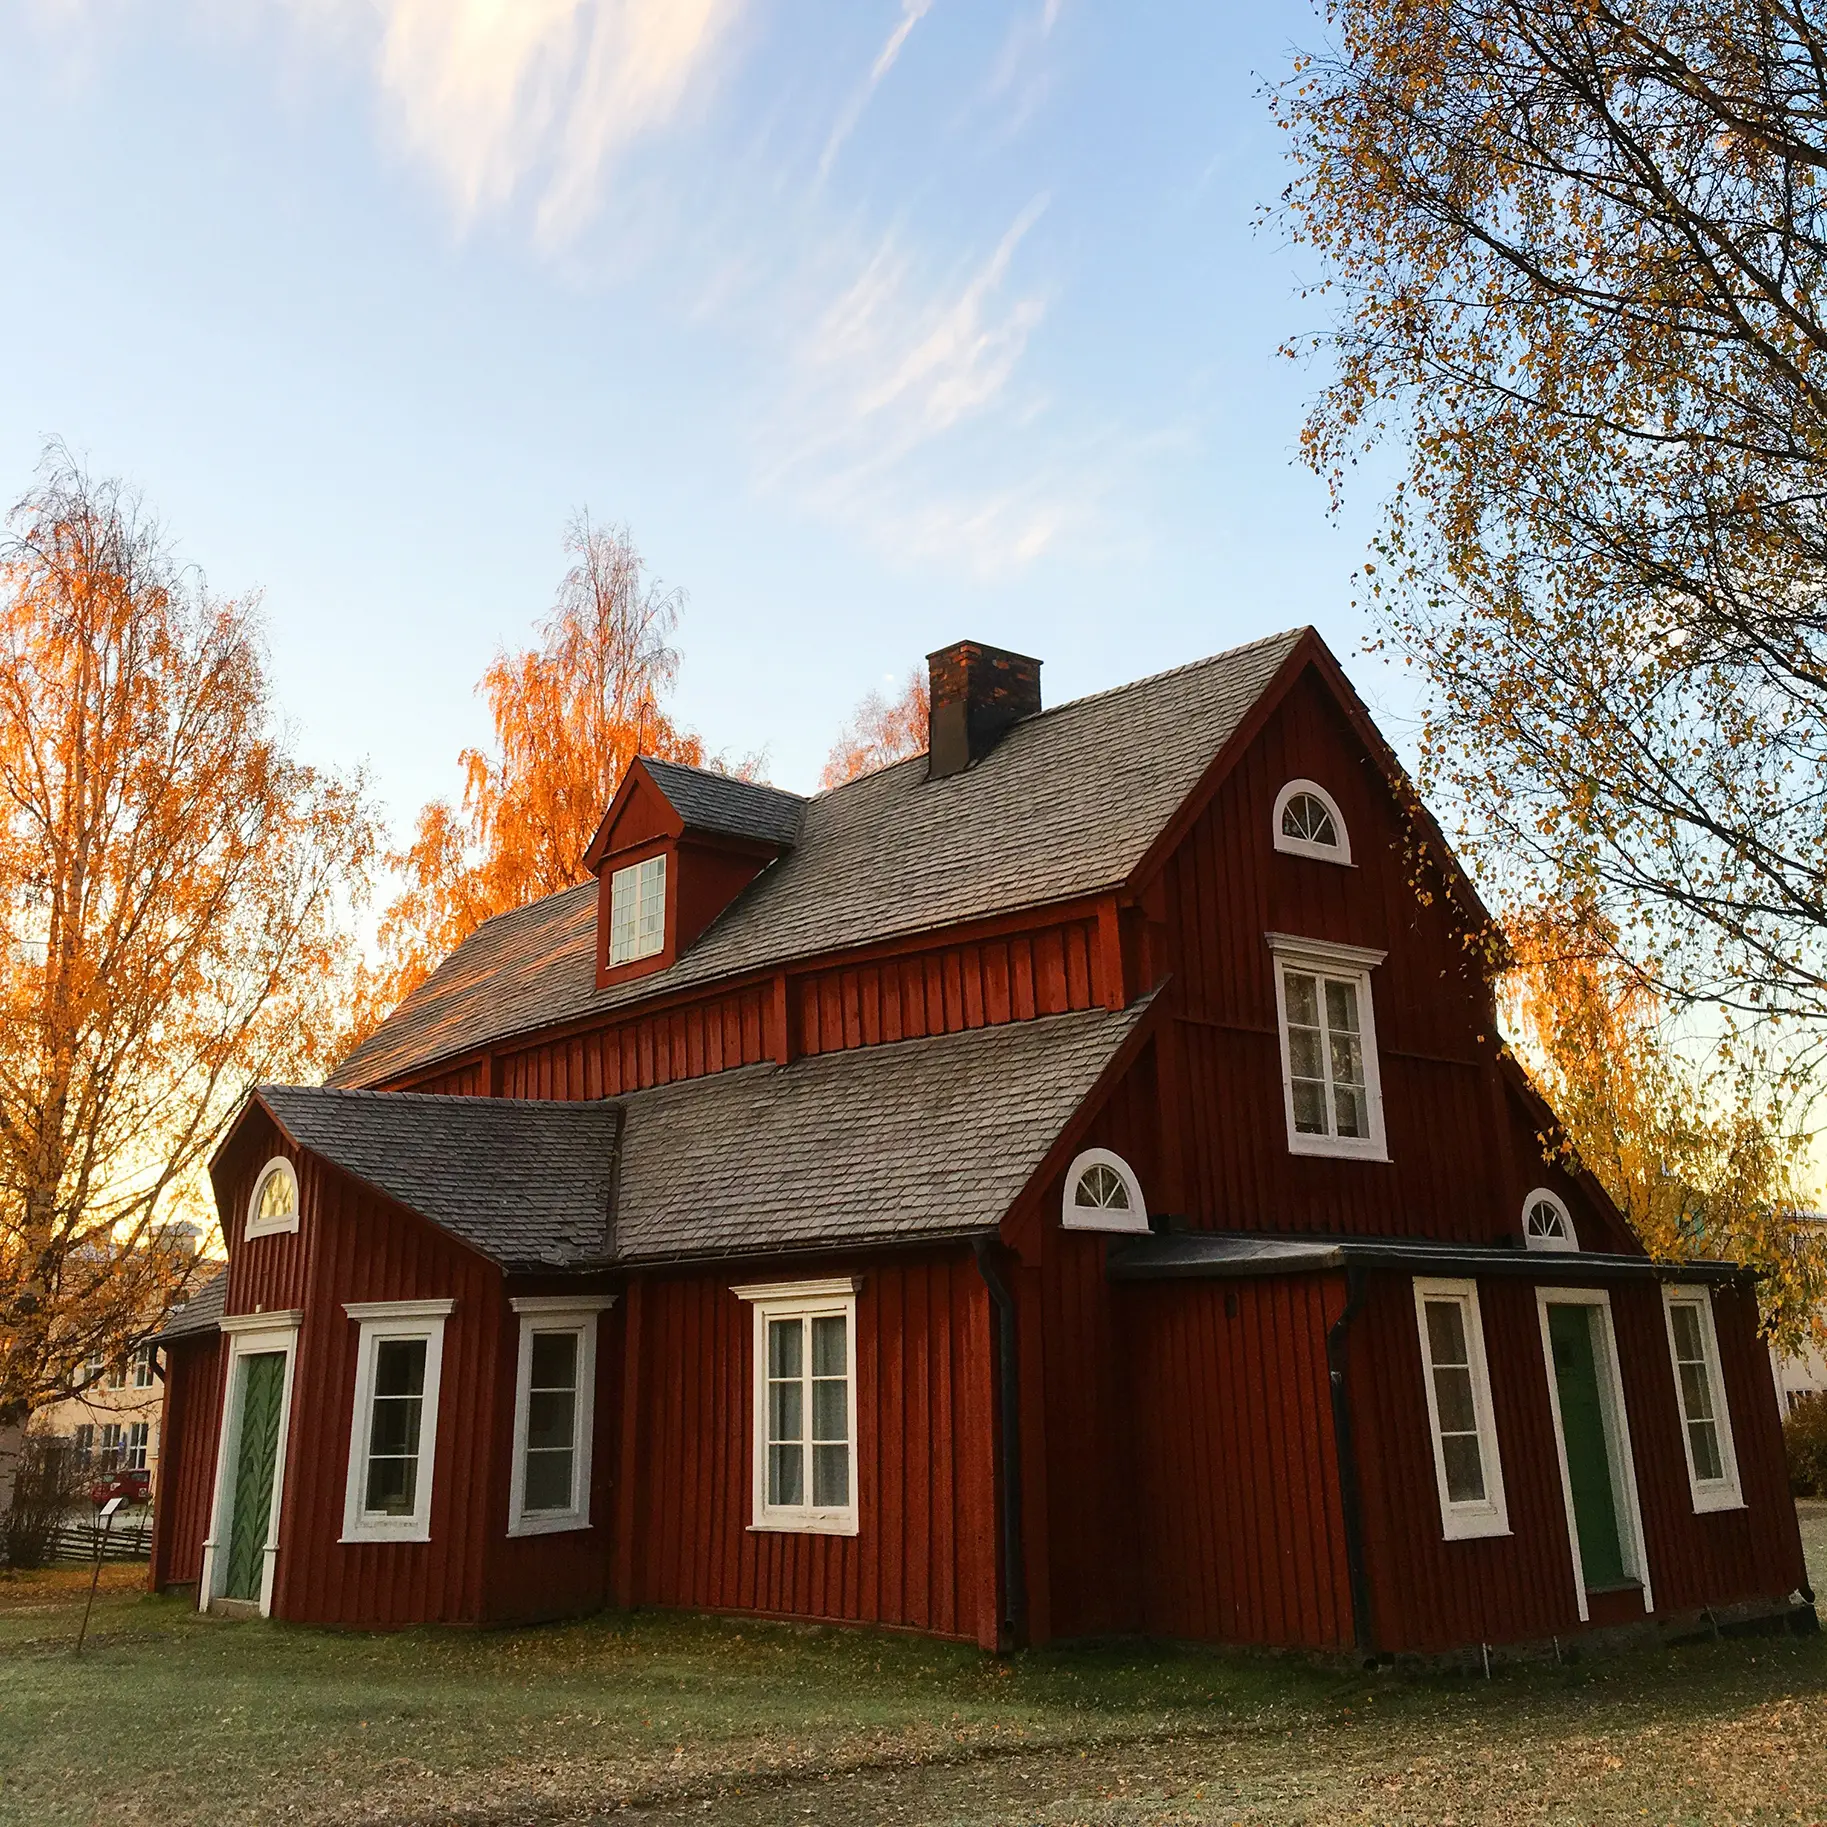 A picture of a red barn-style house on a sunny fall day.